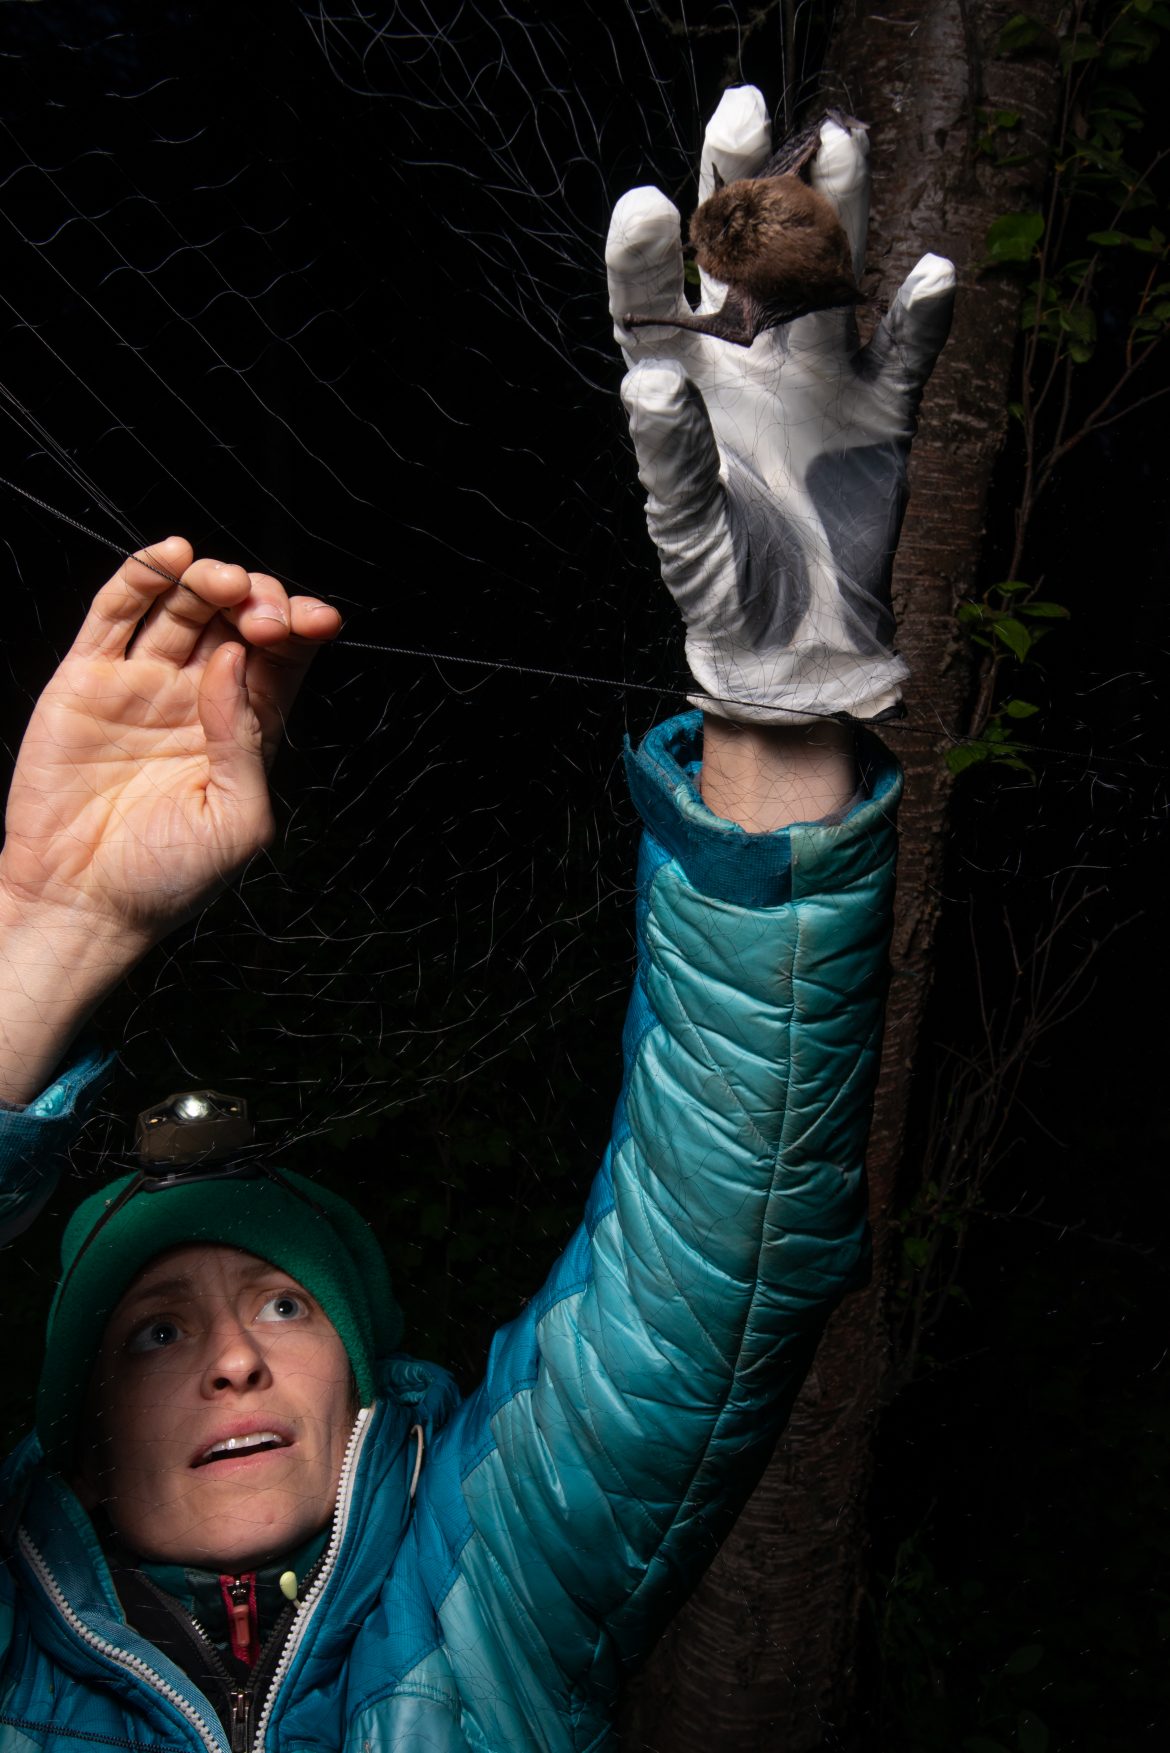 A woman in a blue coat pulls bat out of net with glove